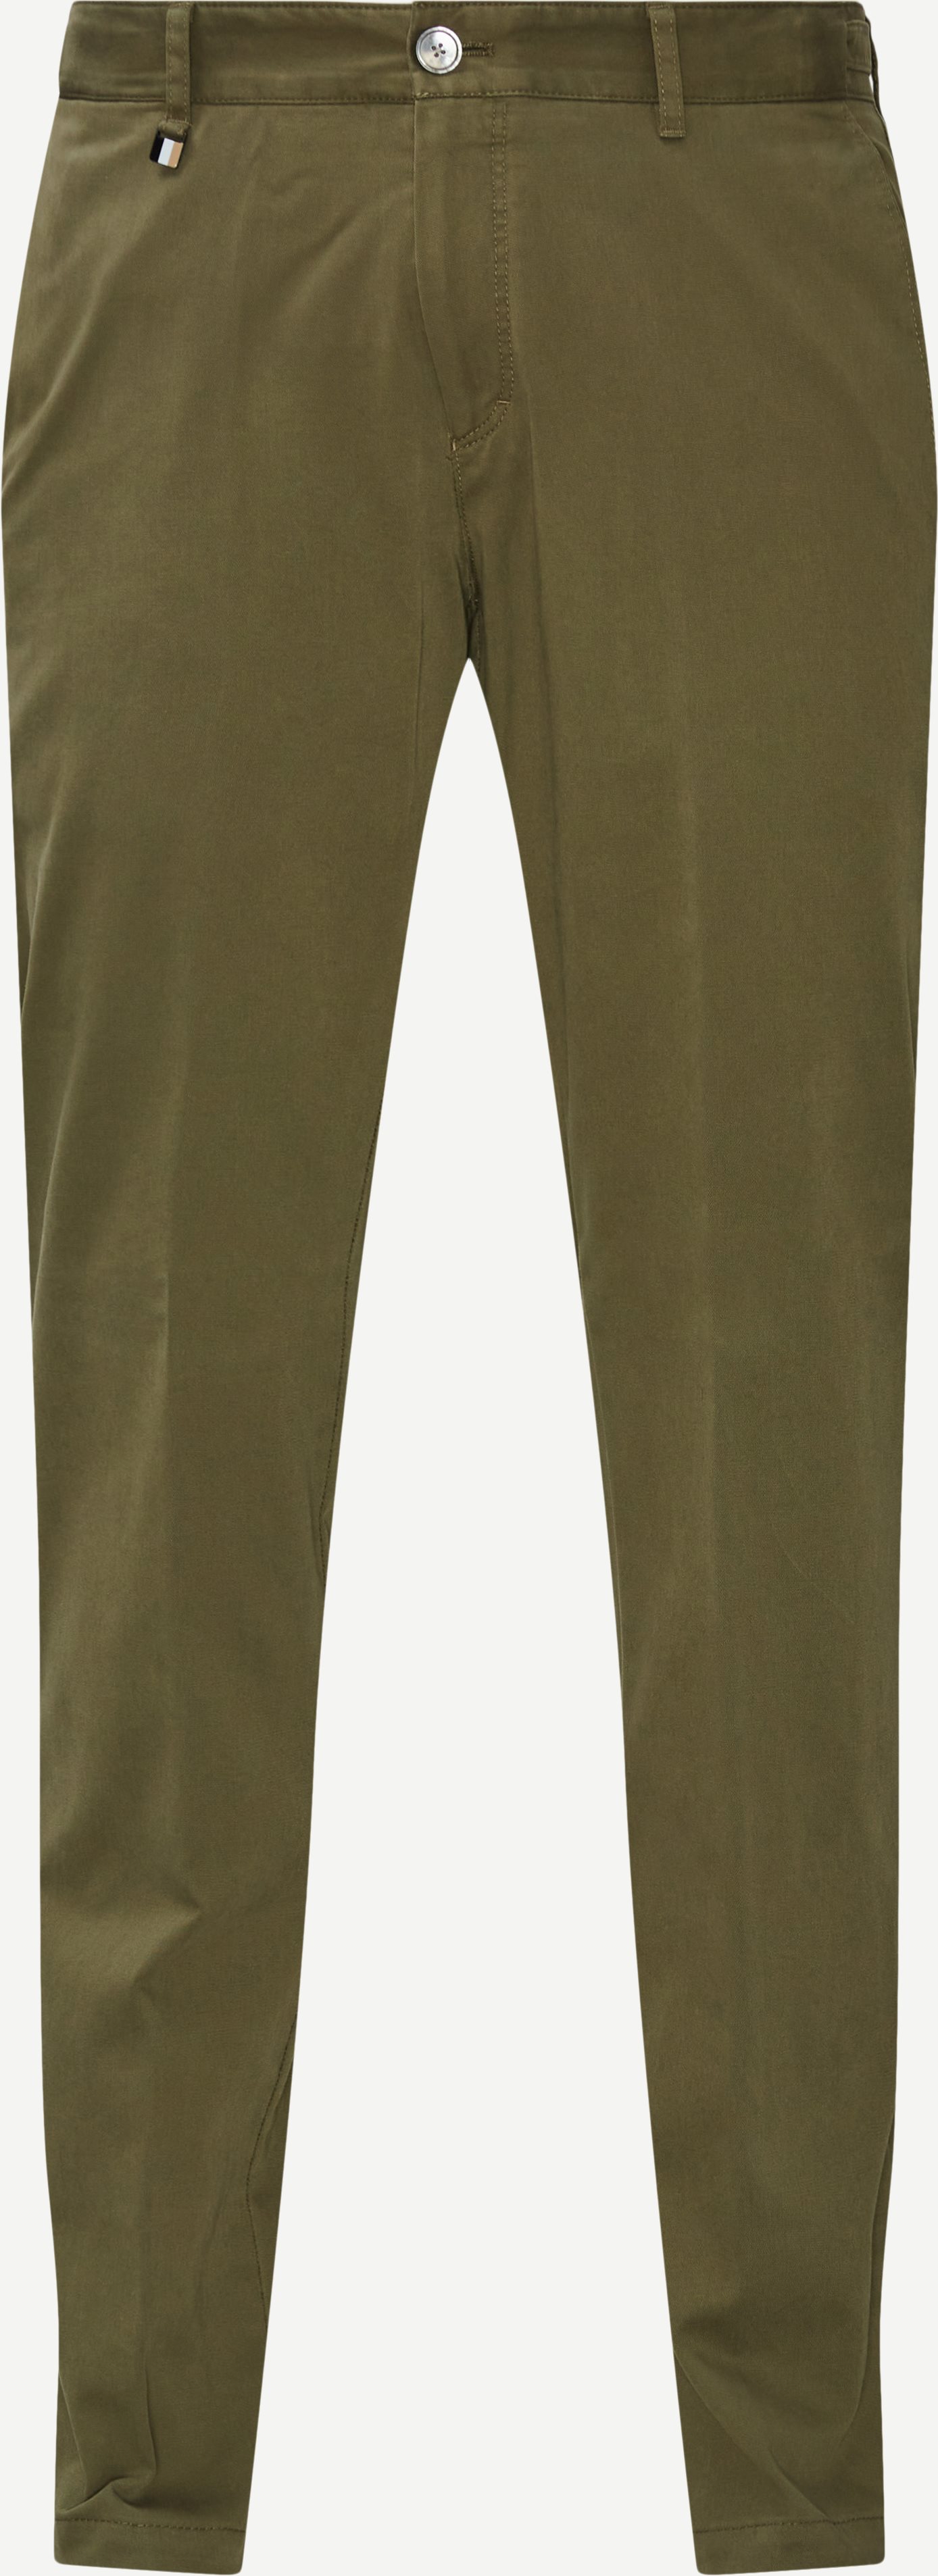 Trousers - Slim fit - Green